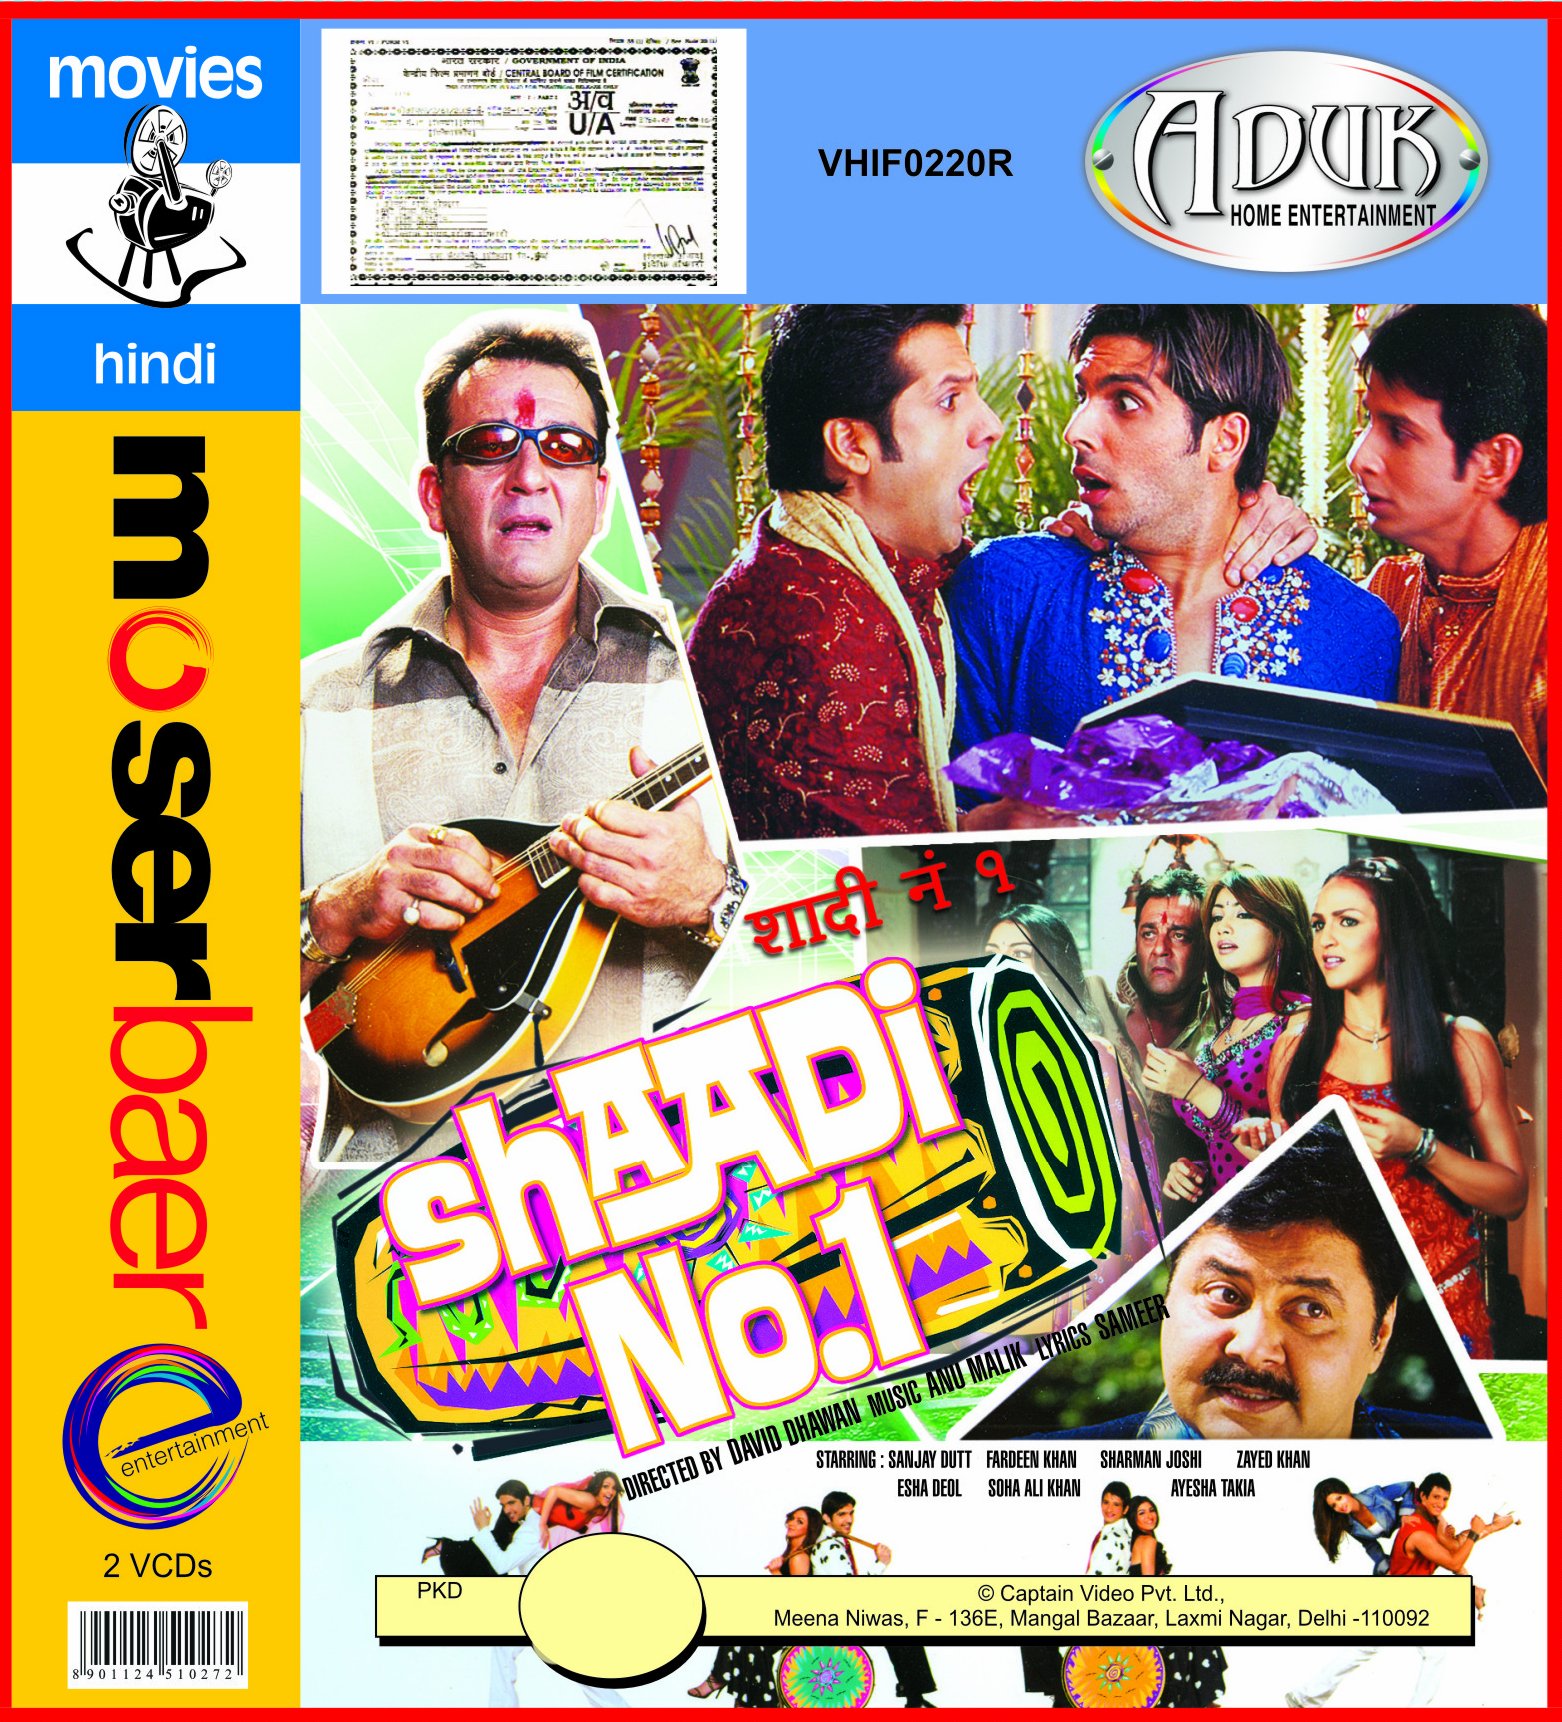 shaadi-no-1-movie-purchase-or-watch-online